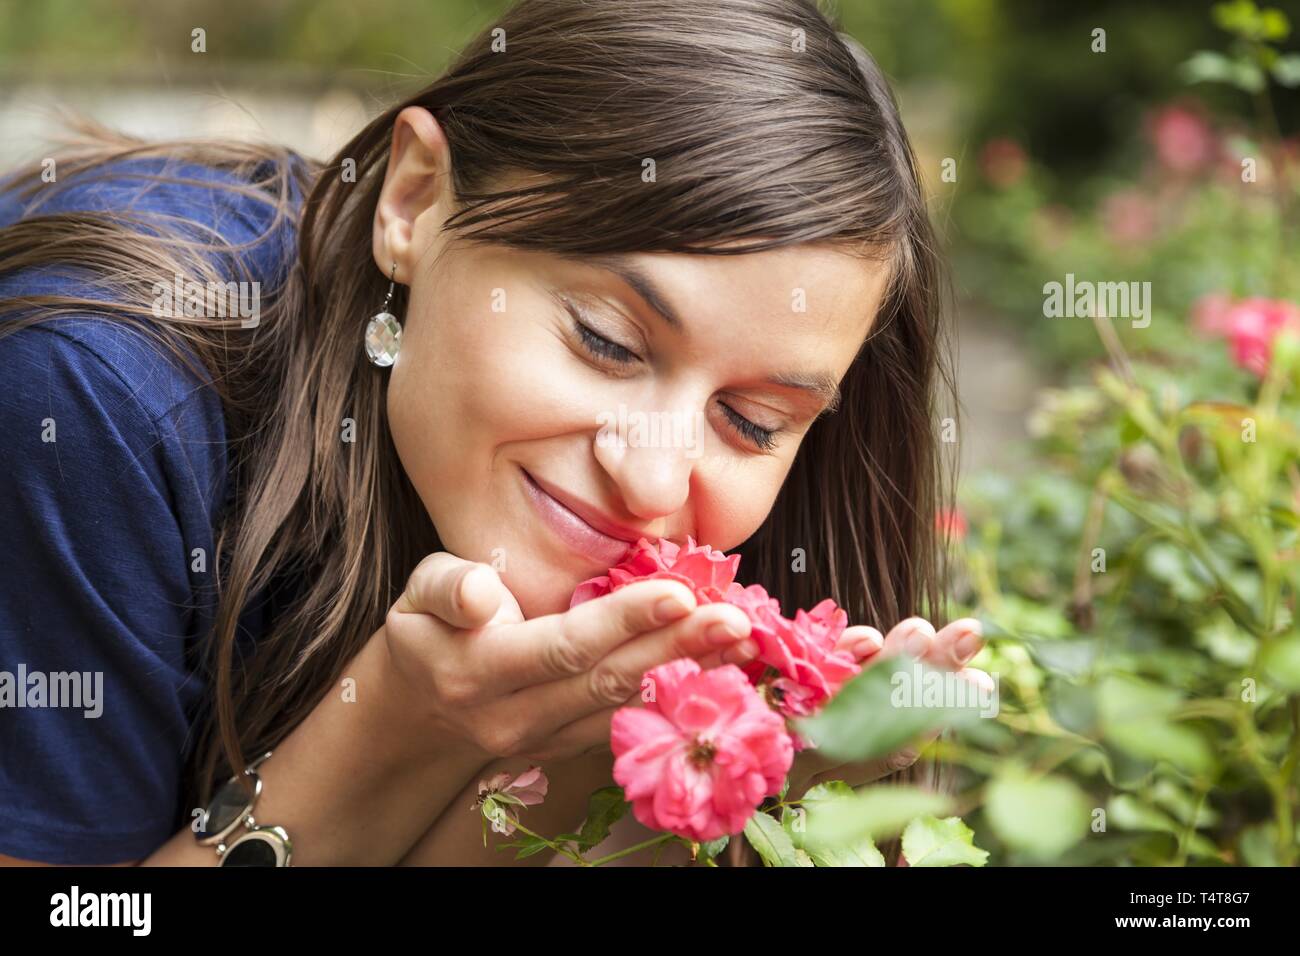 Young woman smelling roses, Germany Stock Photo